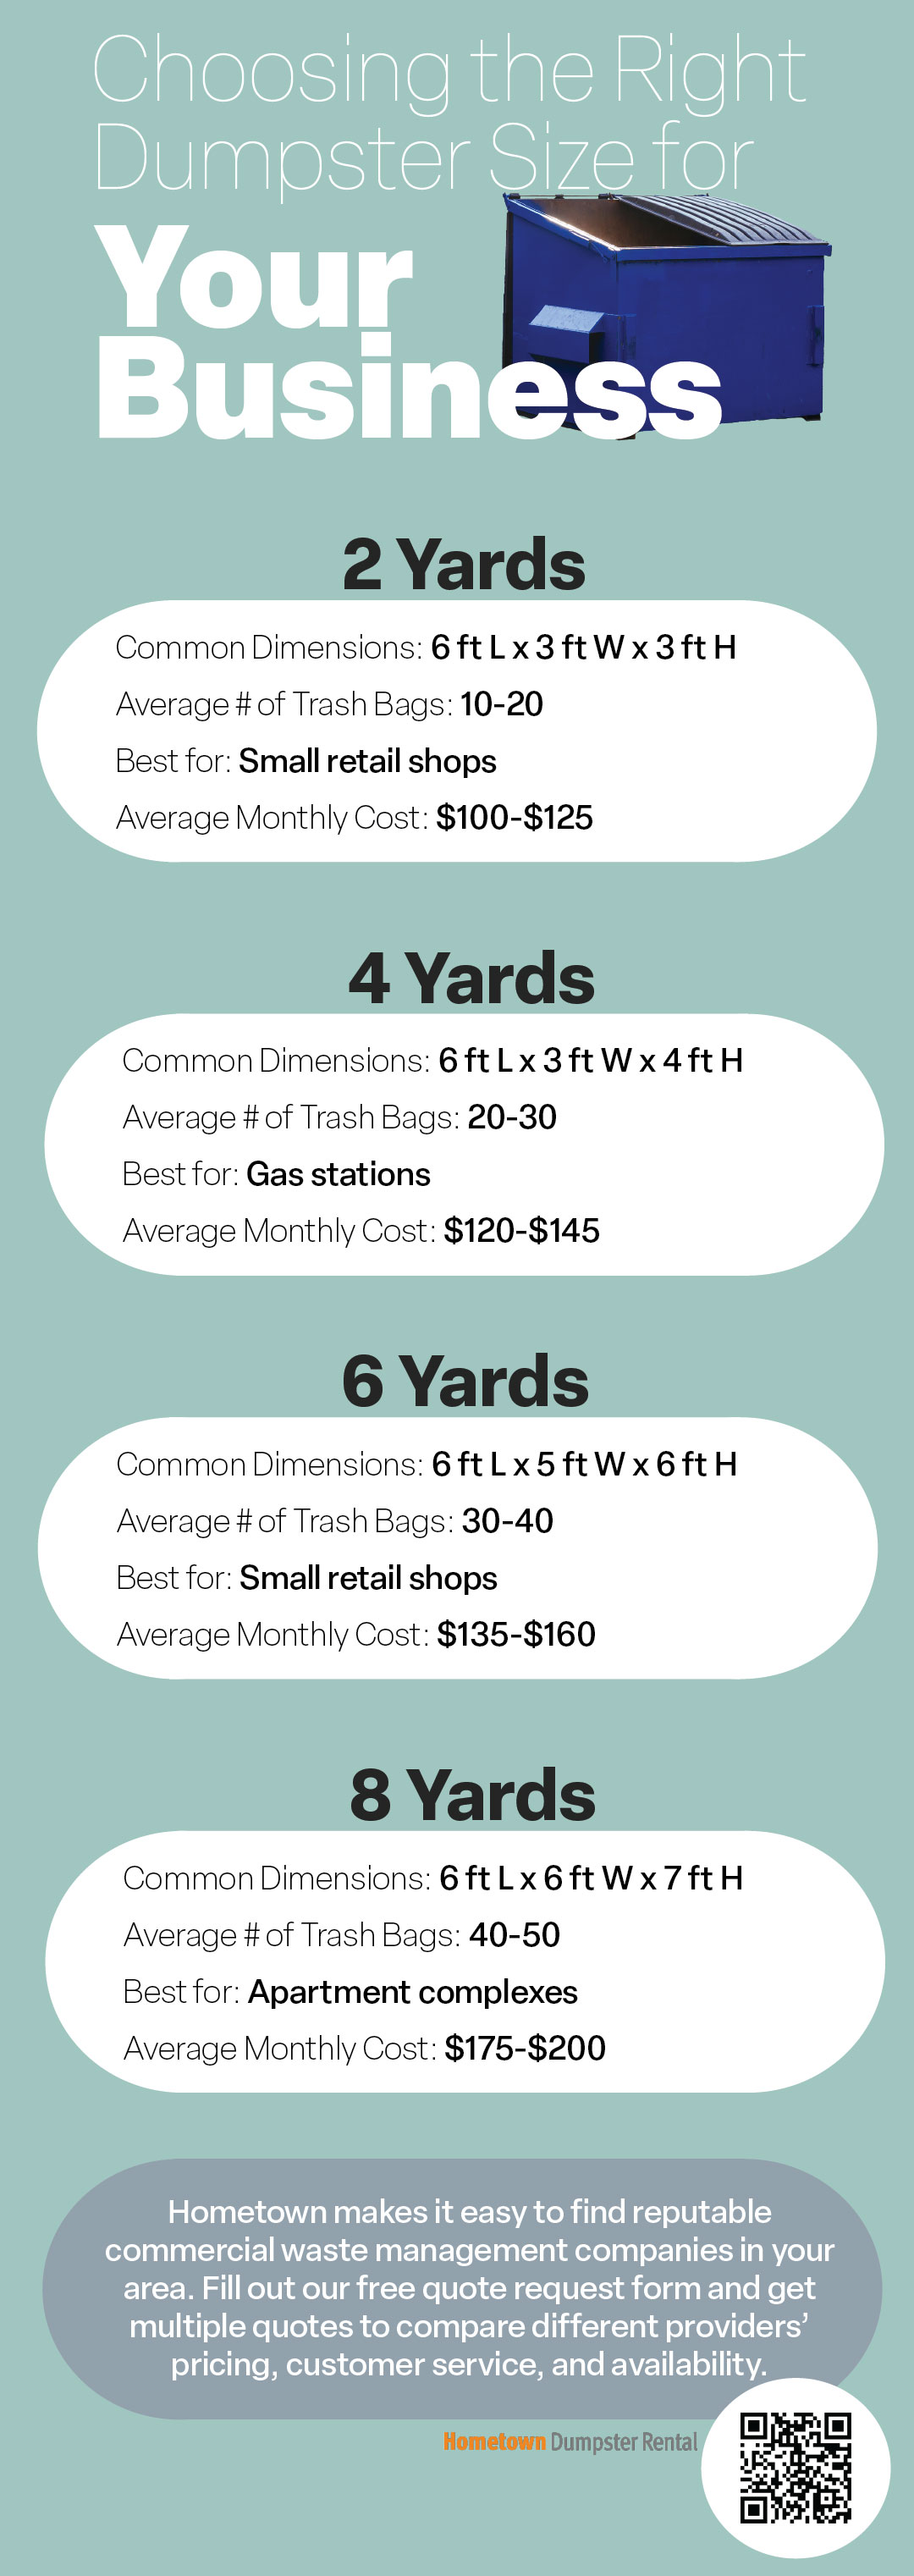 Choosing the Right Dumpster Size for Your Business Infographic